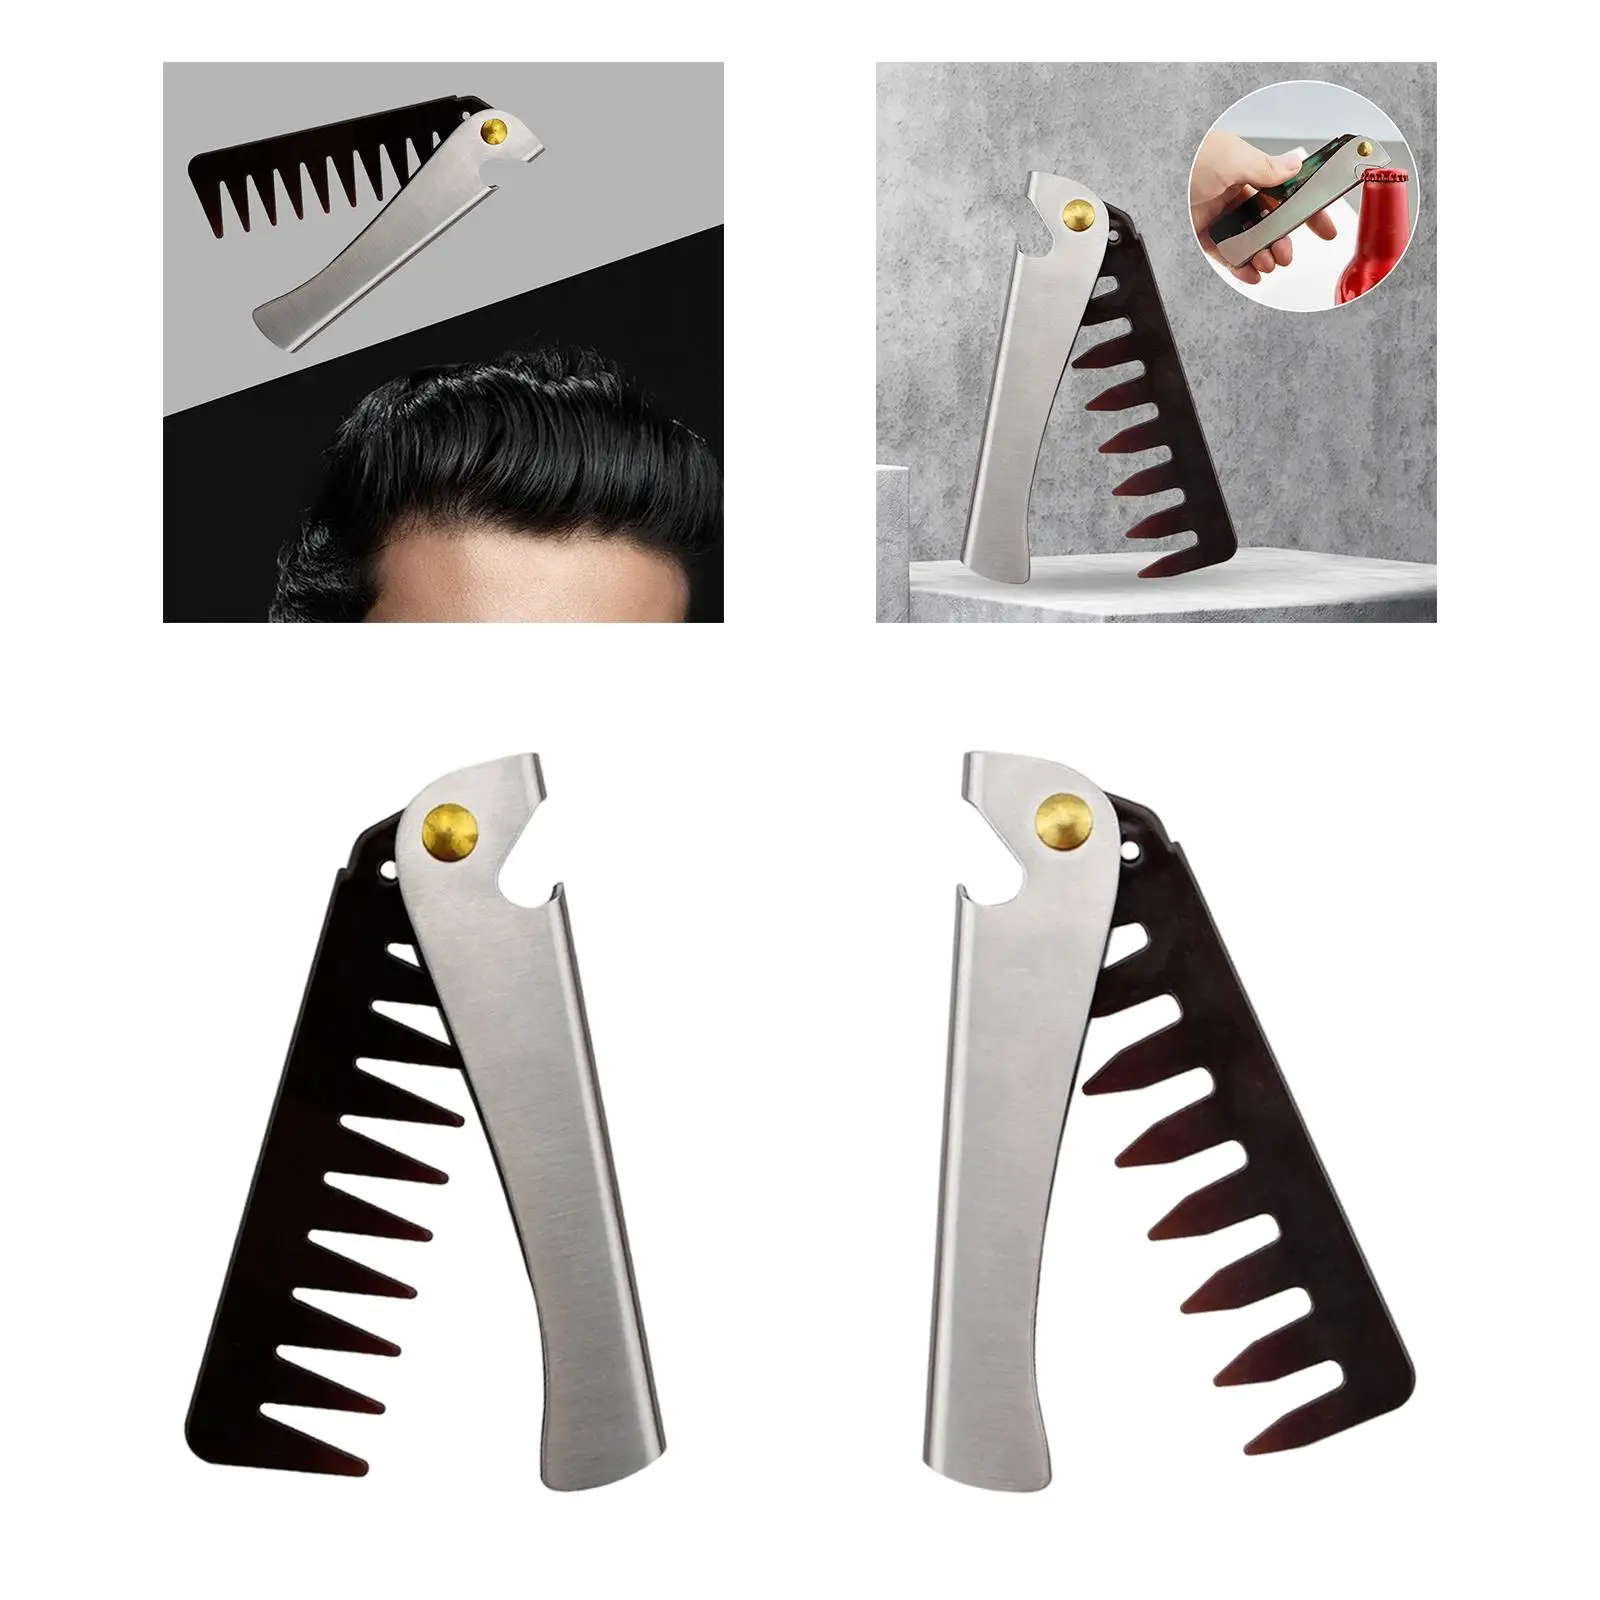 Portable Folding Beard Comb for Men Grooming Styling Hair or Mustache Stainless Steel Pocket Comb for Home Use Beauty Salon